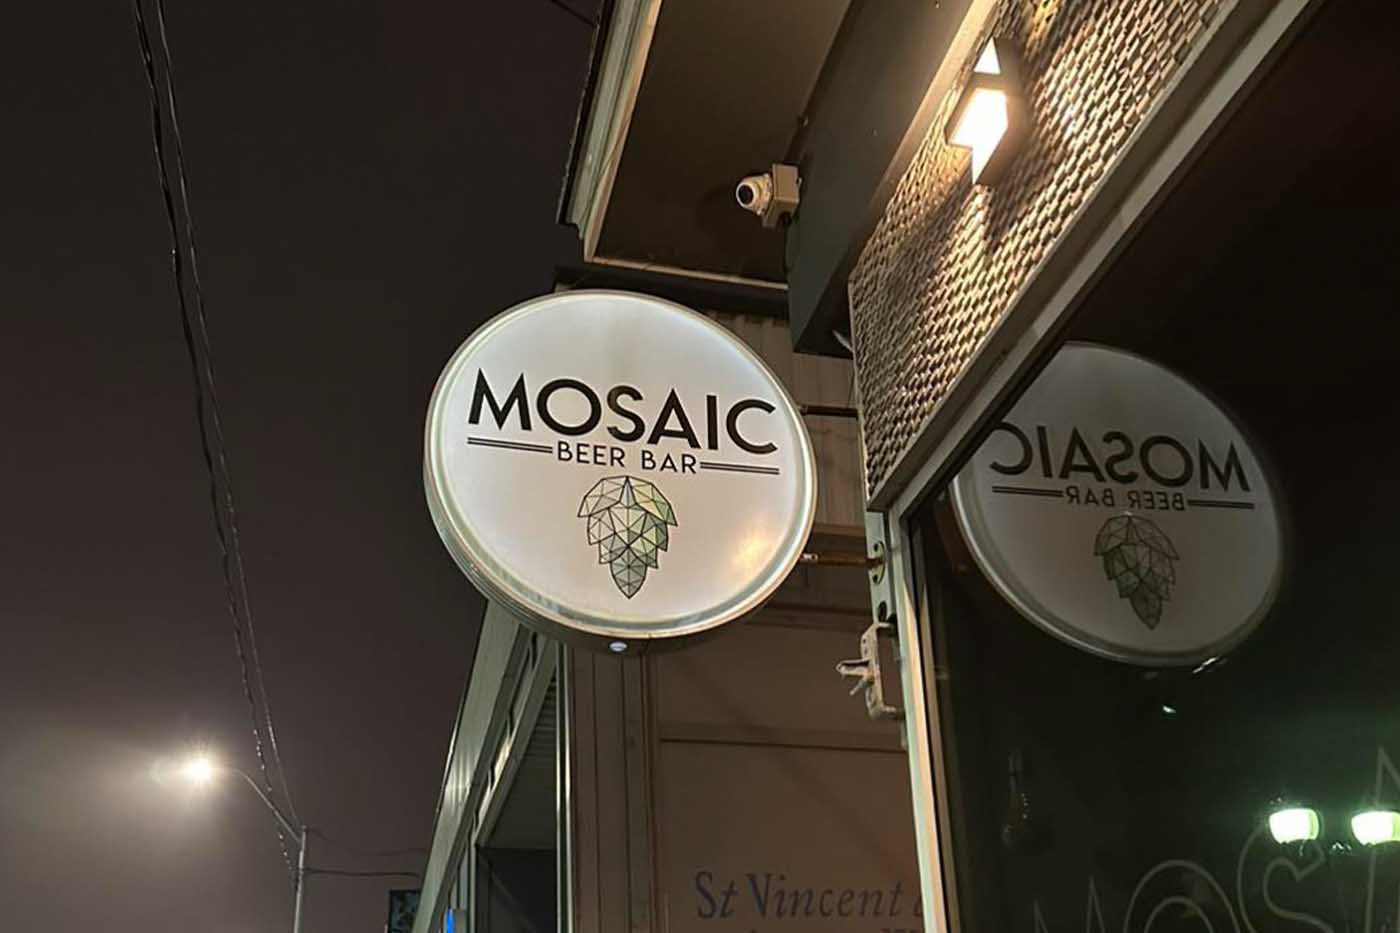 Mosaic Bar Hamilton Reopening Soon: What to Expect and When